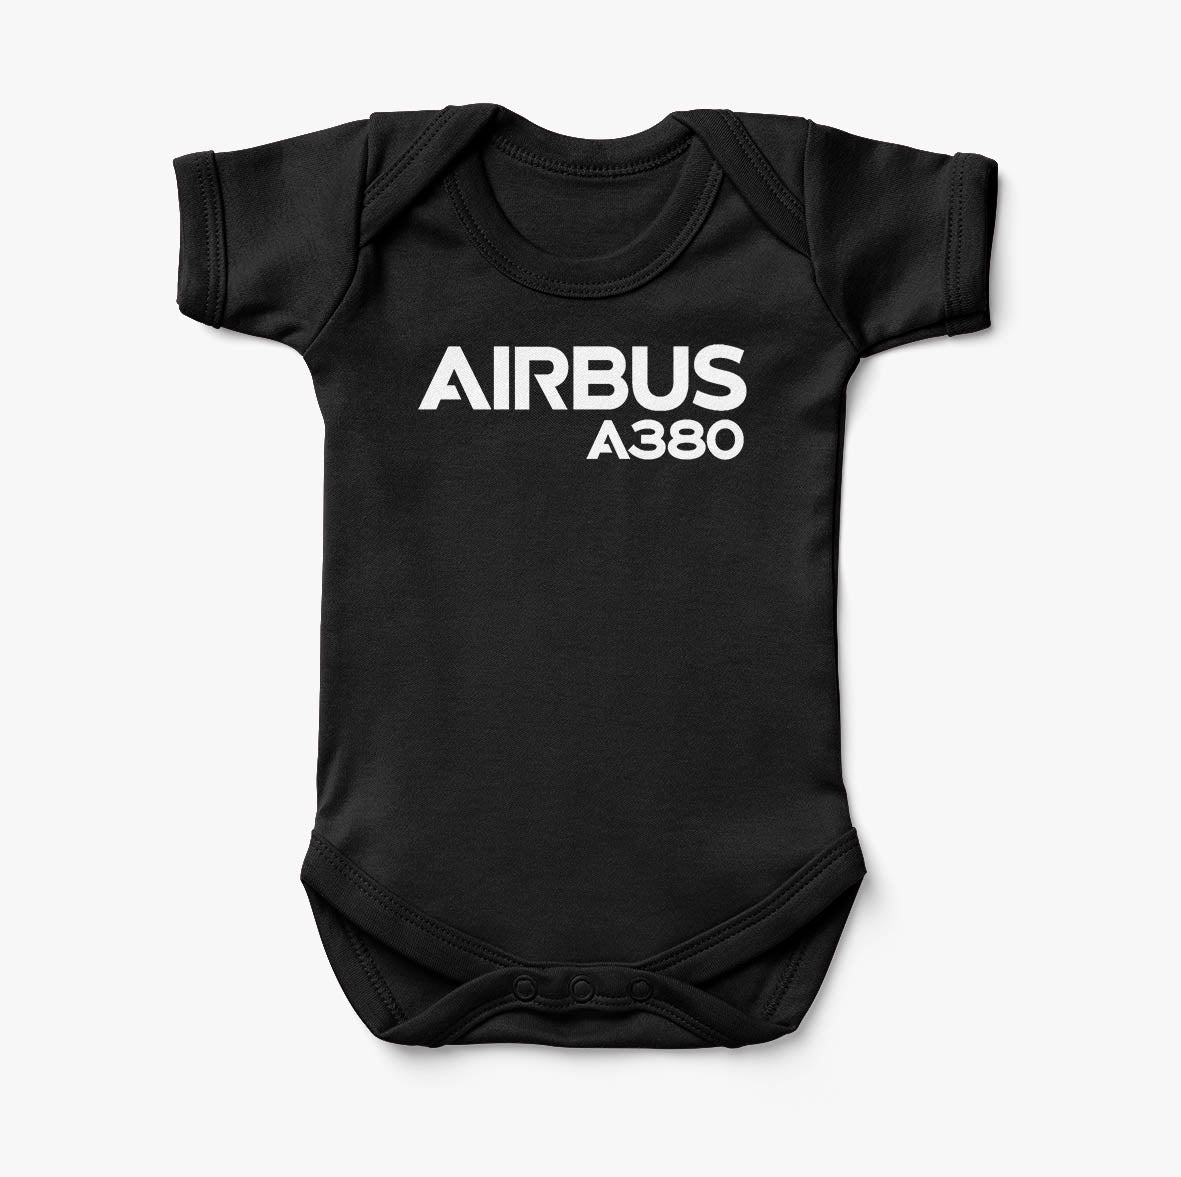 Airbus A380 & Text Designed Baby Bodysuits